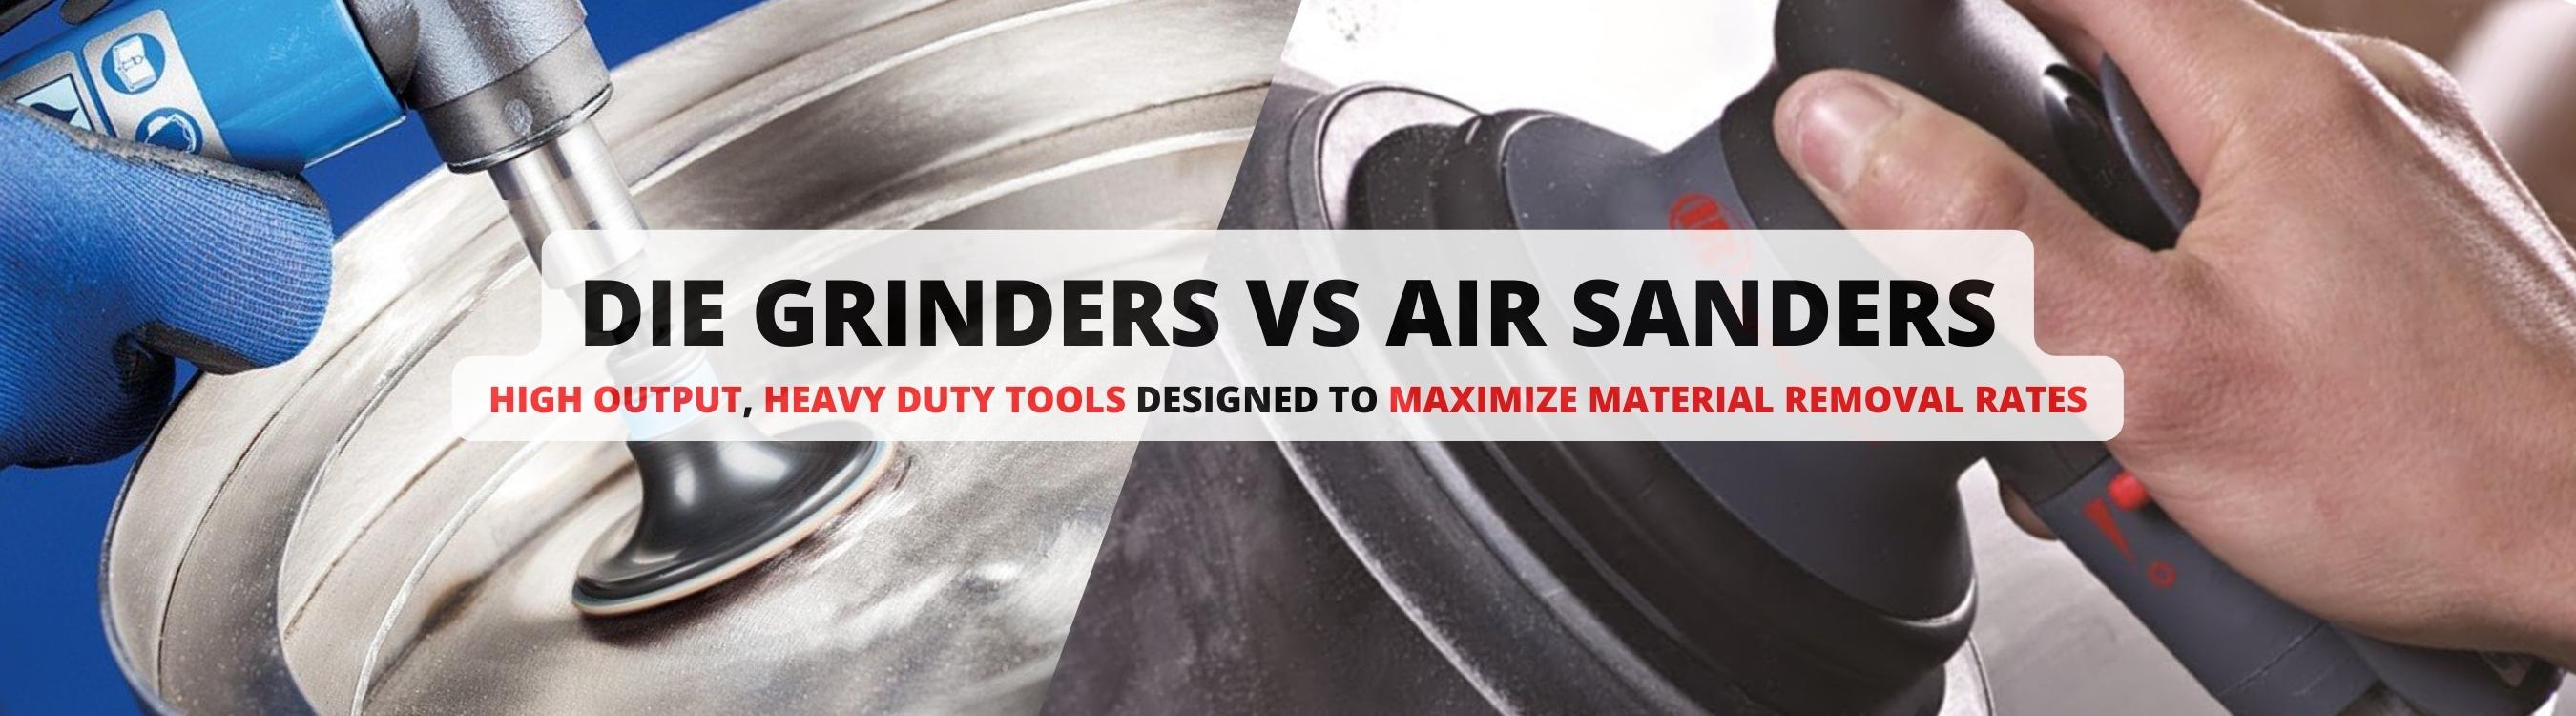 The Benefits of Using an Electric vs. Manual Hand Sander